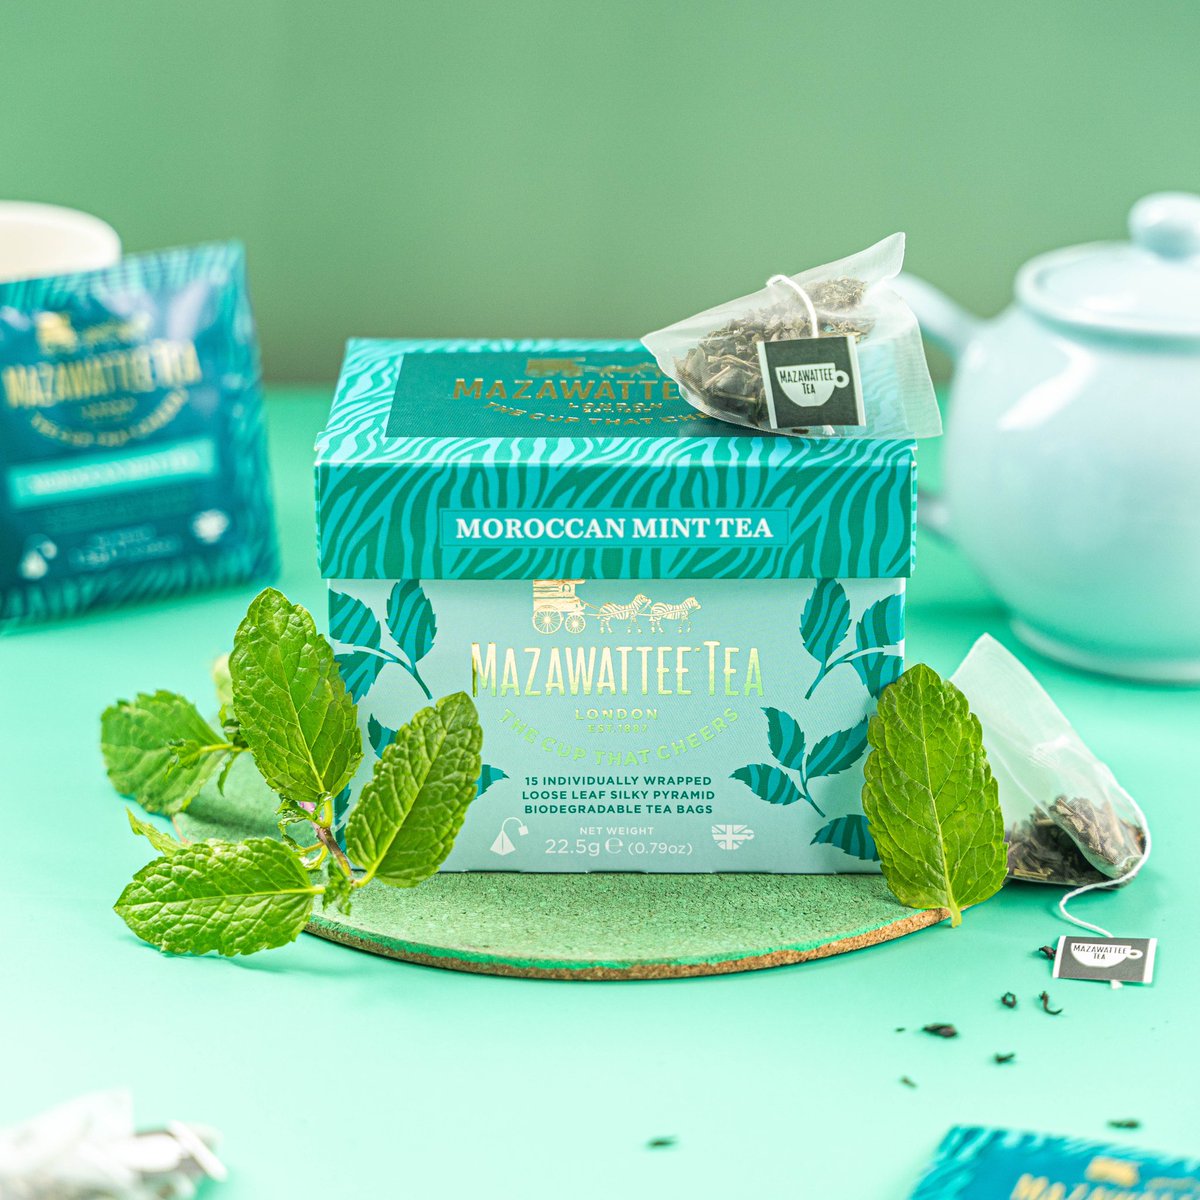 Our award winning Moroccan Mint Tea provides you with a light, clean and refreshing cup of tea. This blend works in pleasing harmony to produce a fresh and delicious taste.